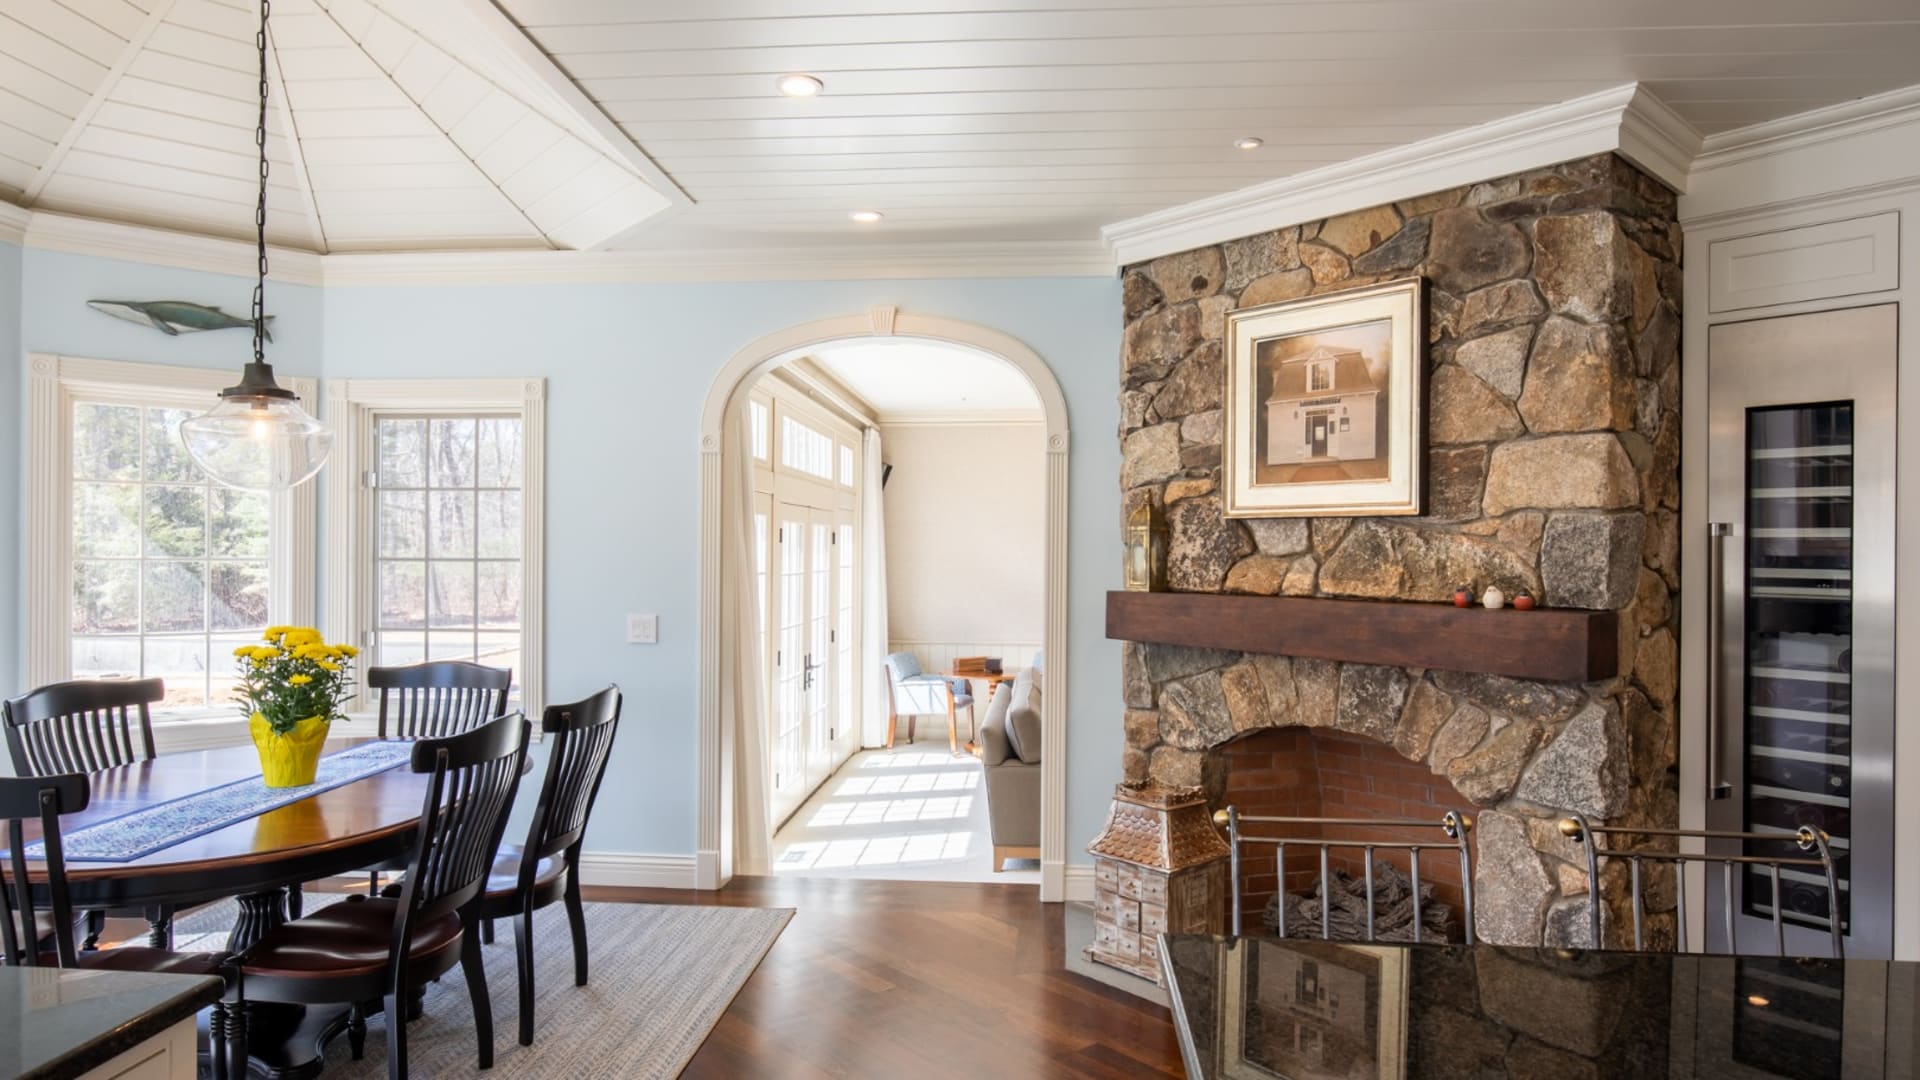 Breakfast nook and stone fireplace off kitchen